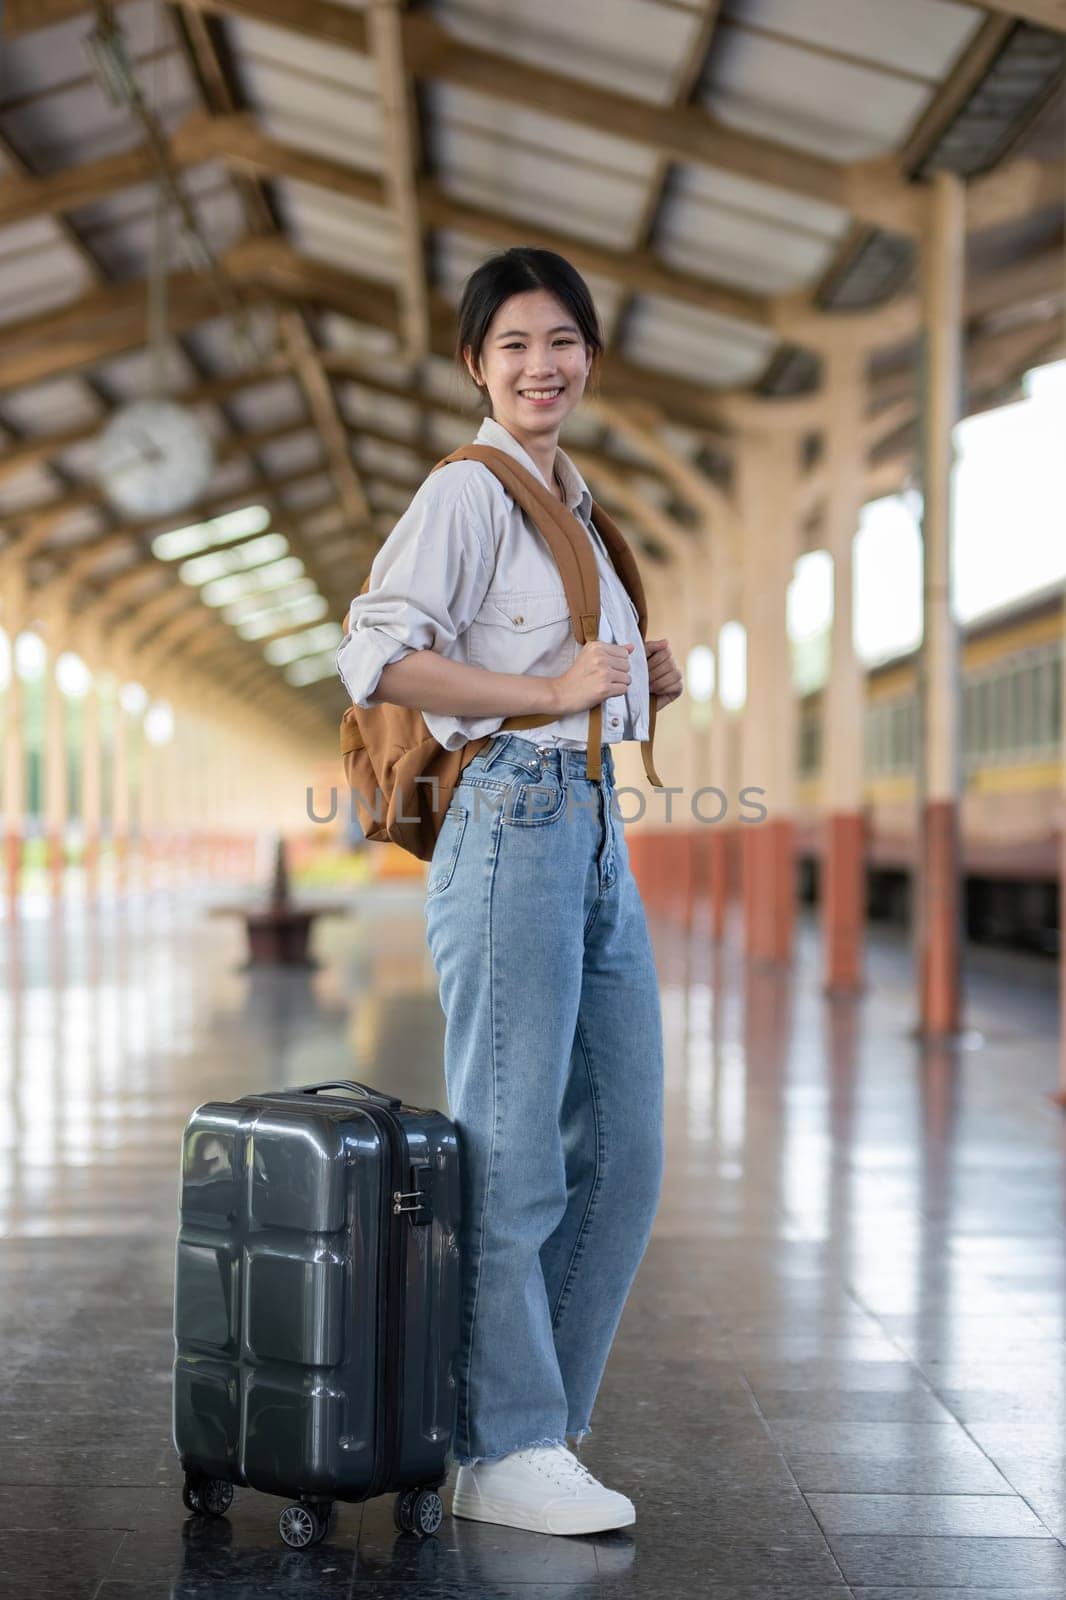 Happy young Asian female tourist carrying a backpack, holding a camera, preparing to wait for the train at the train station waiting for her vacation trip..